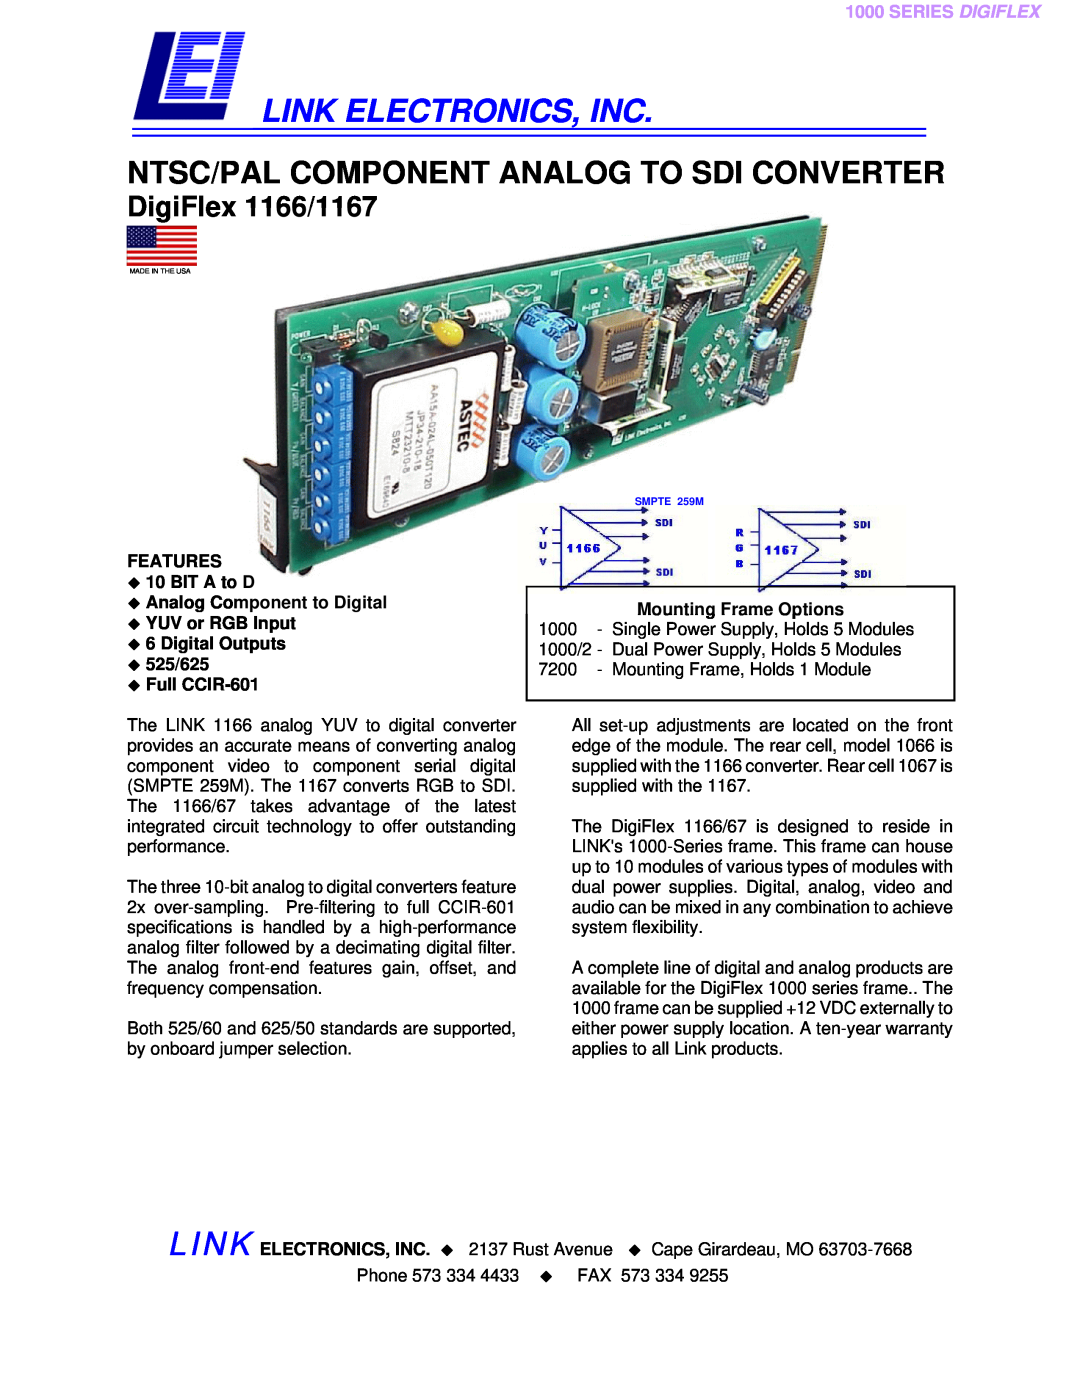 Link electronic specifications Link Electronics, Inc, Ntsc/Pal Component Analog To Sdi Converter, DigiFlex 1166/1167 